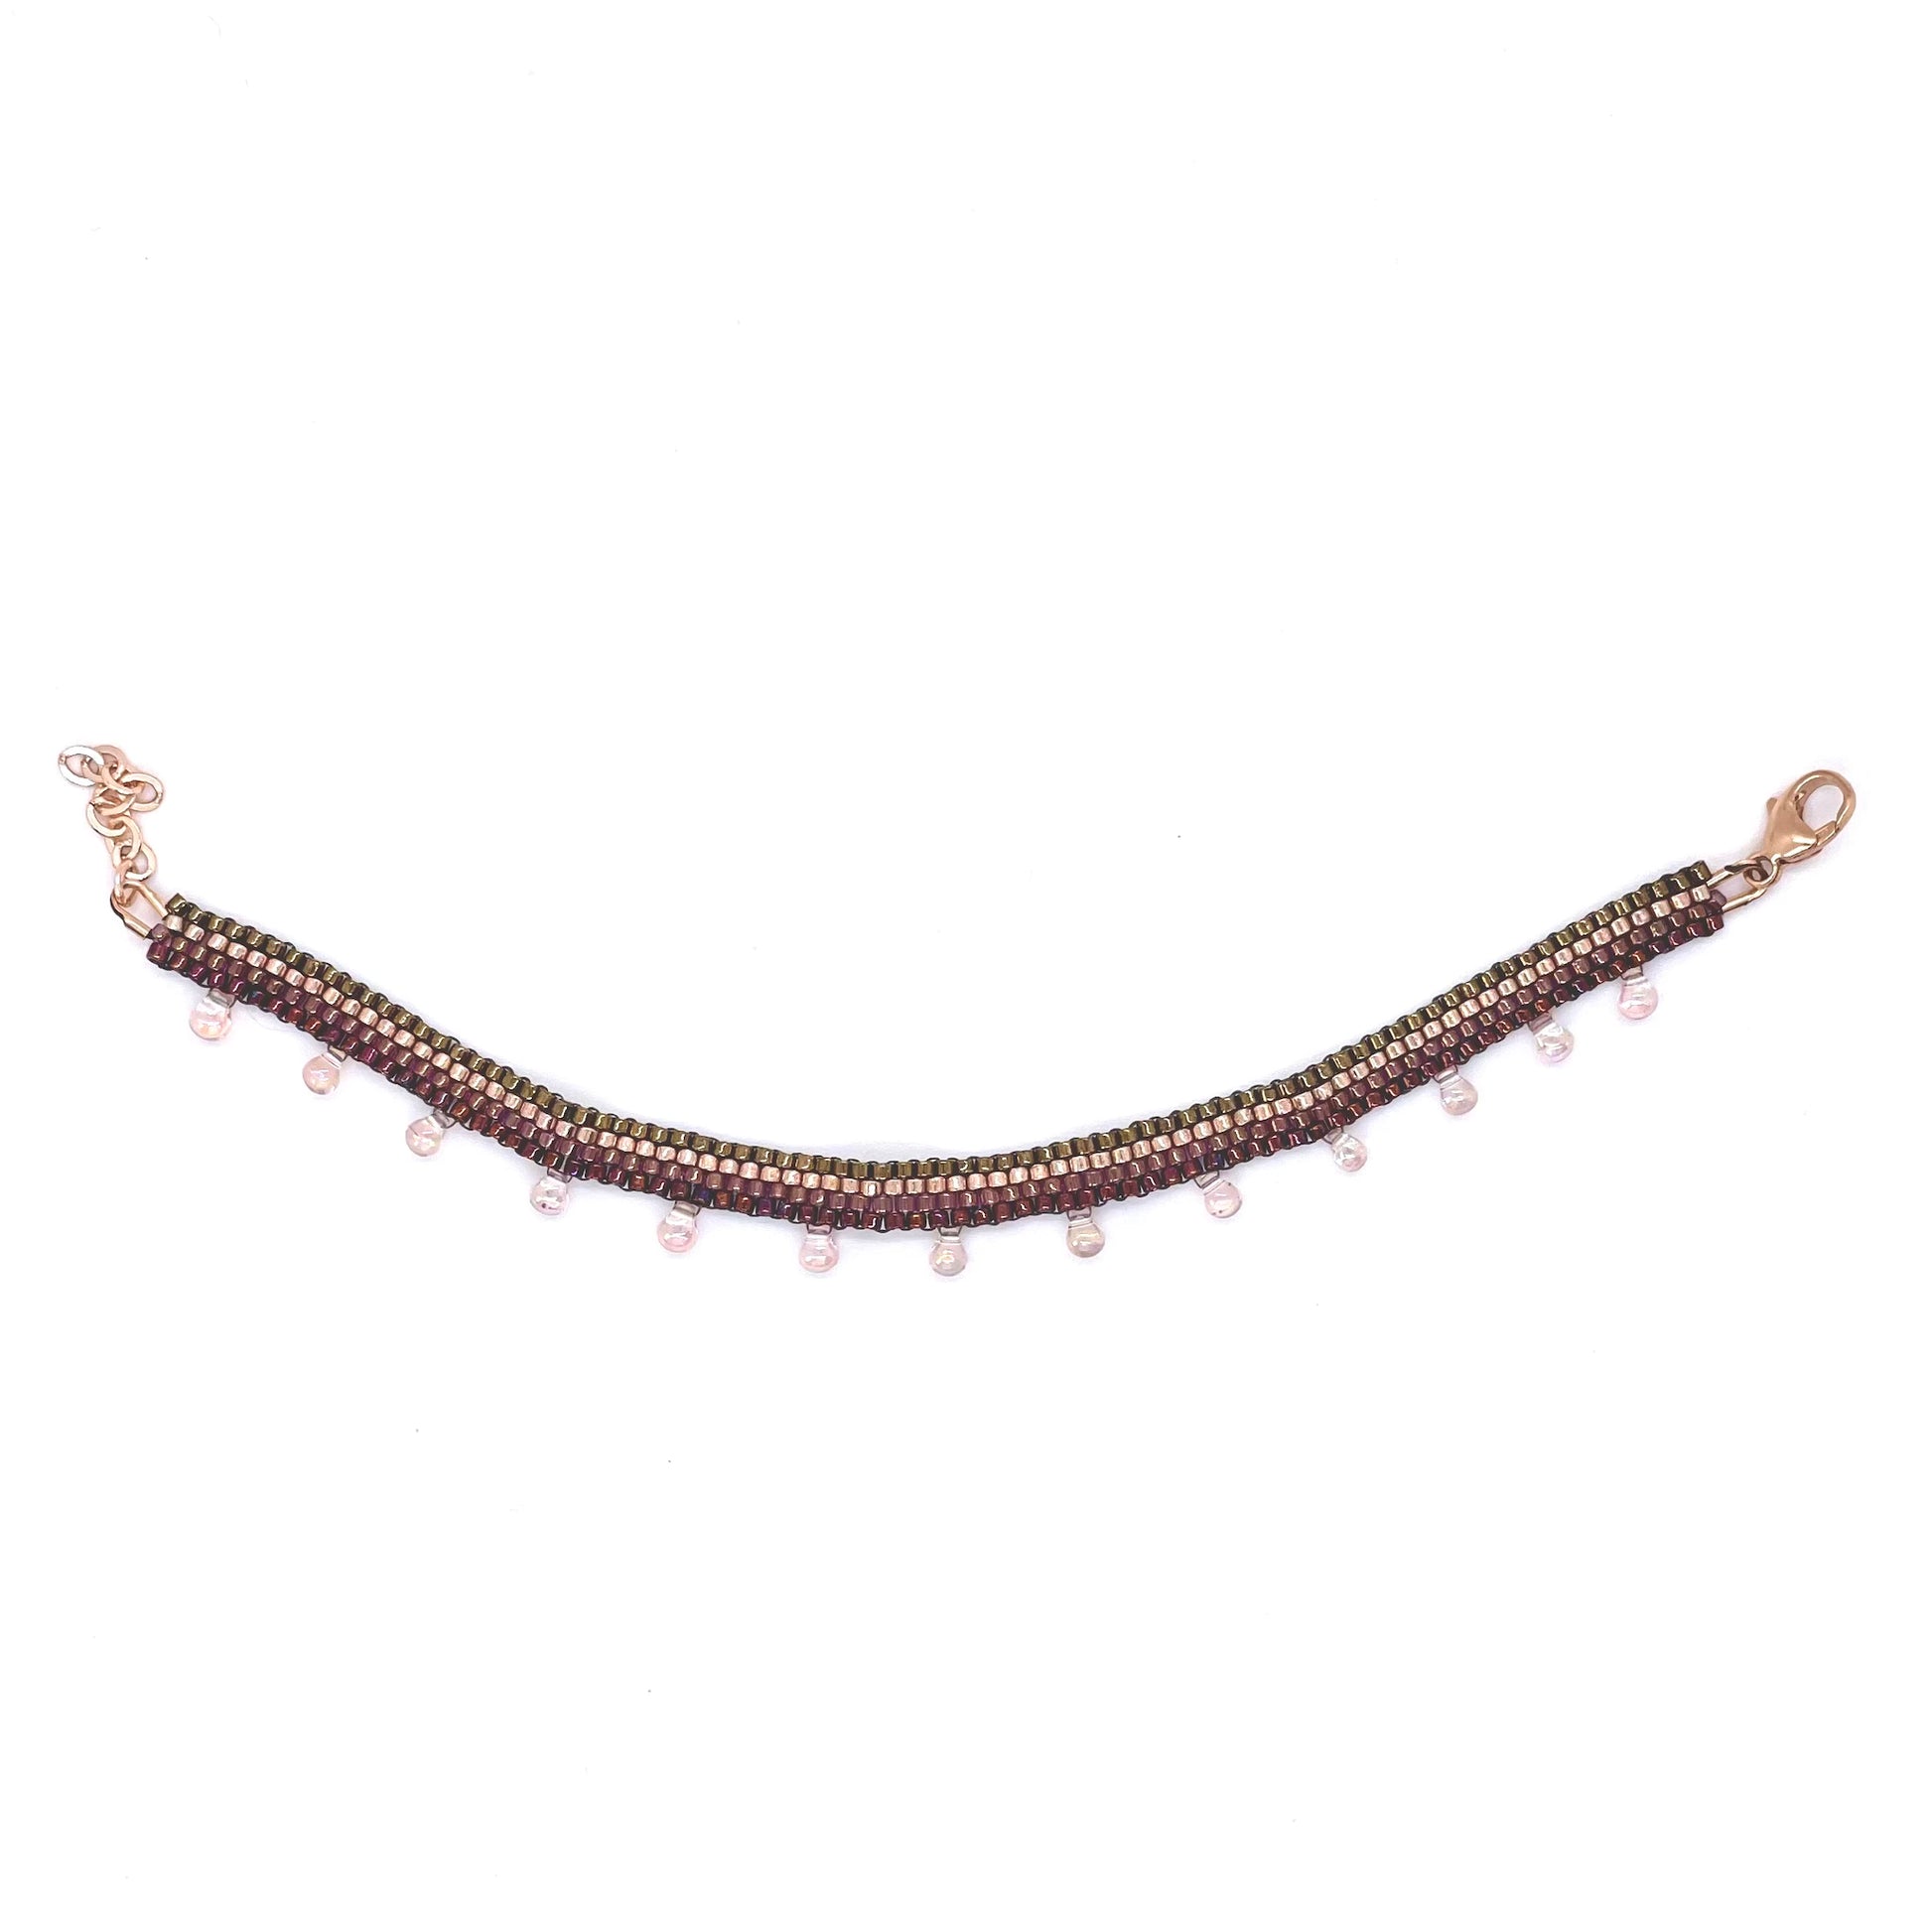 Woven ankle bracelet with berry and bronze/gold-tone seed beads and pale pink iridescent droplet beads.